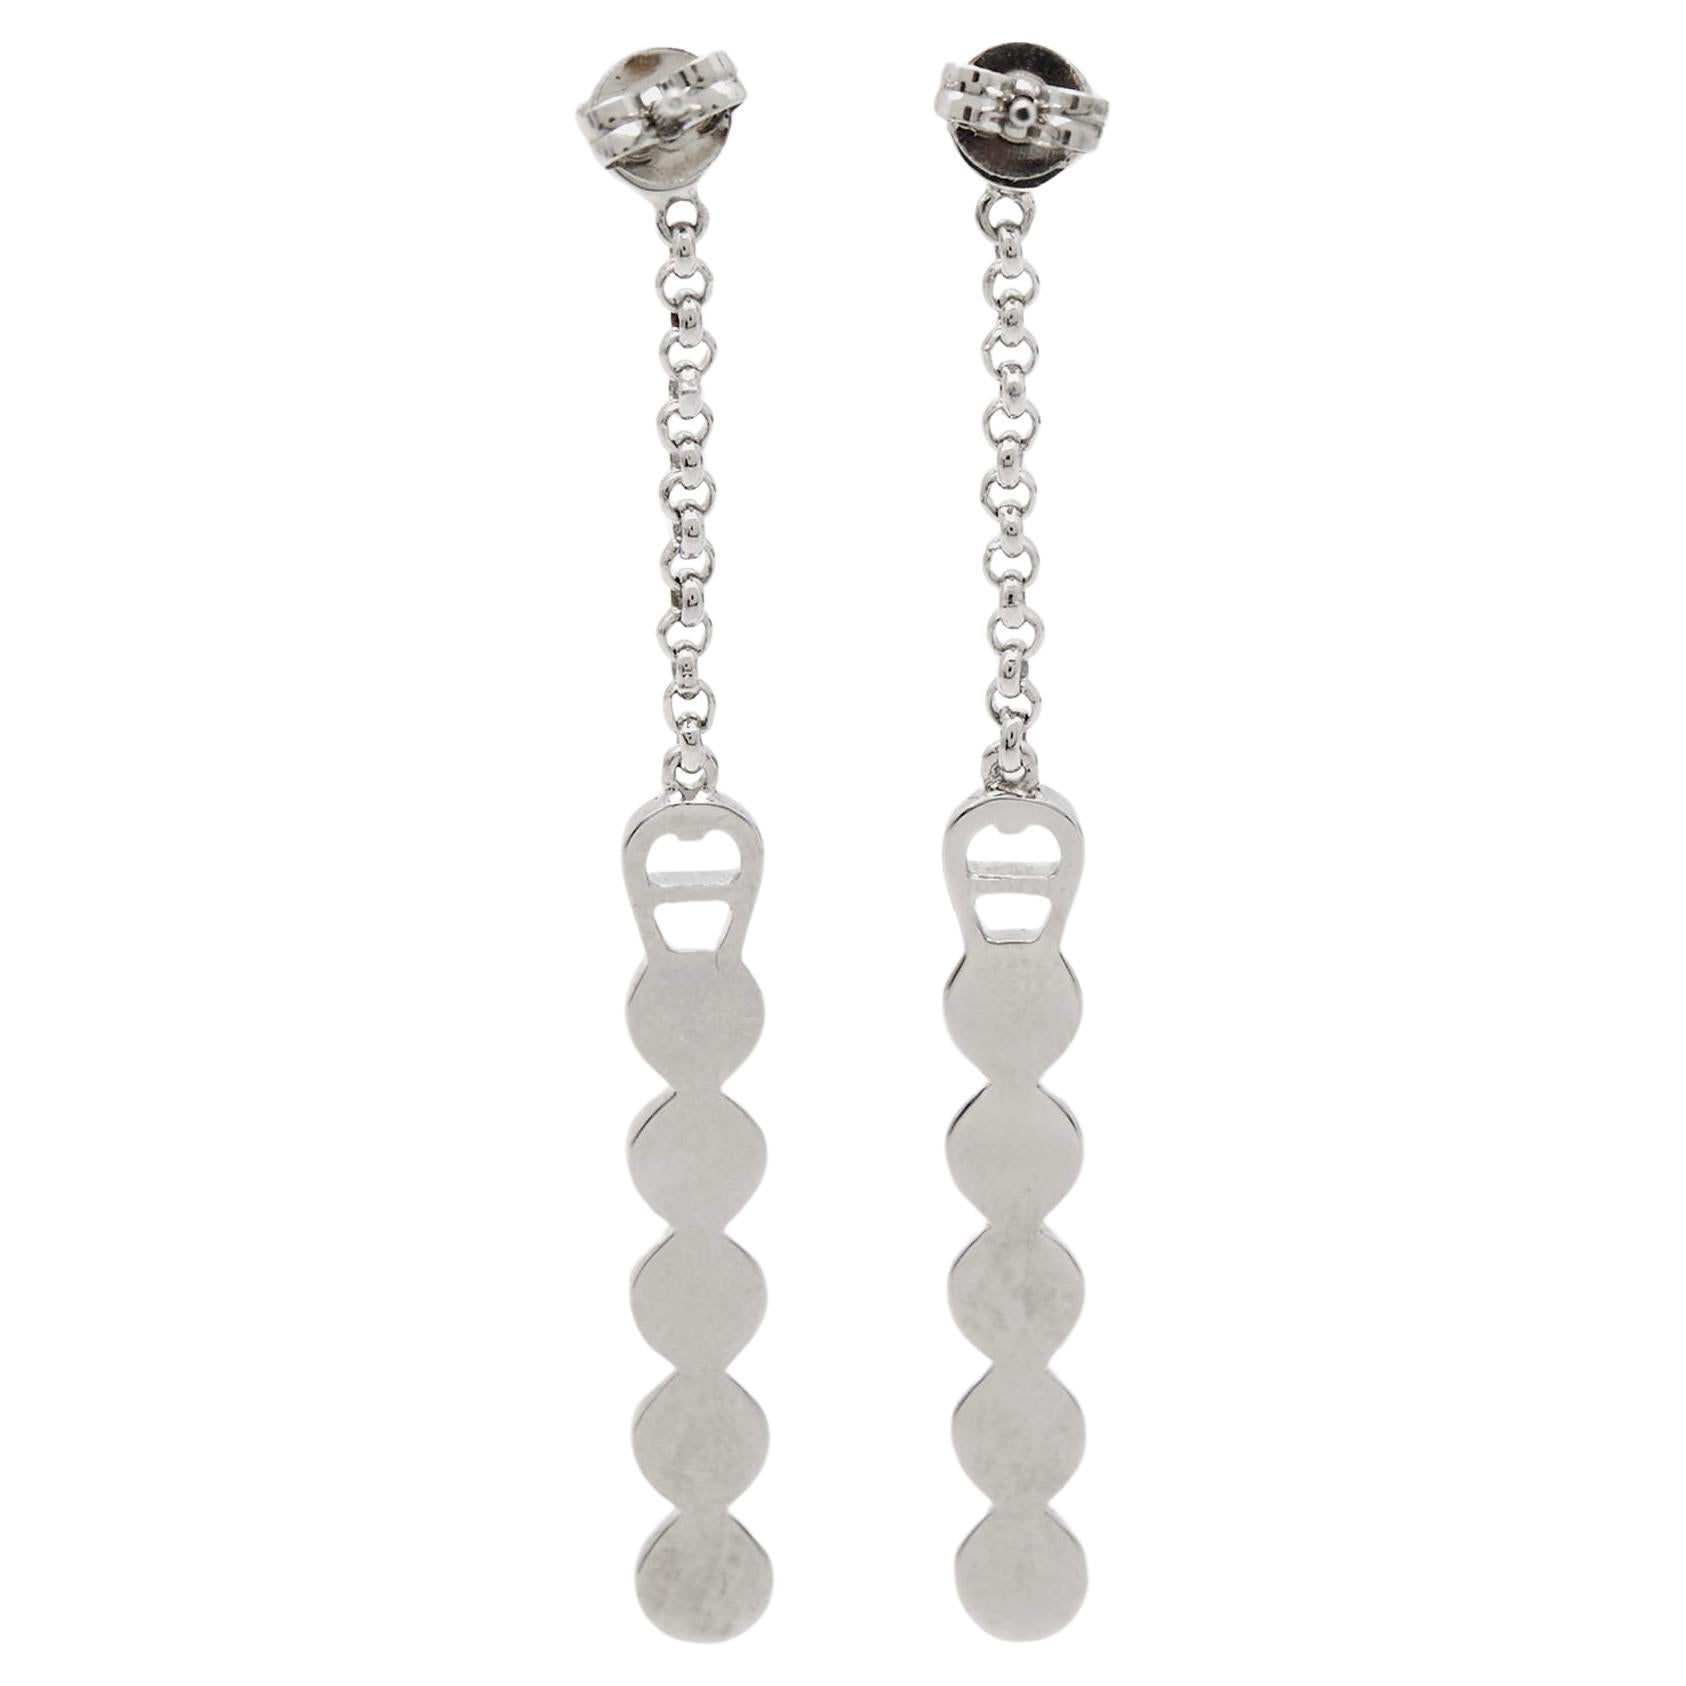 Aigner Crystals Silver Tone Earrings For Sale